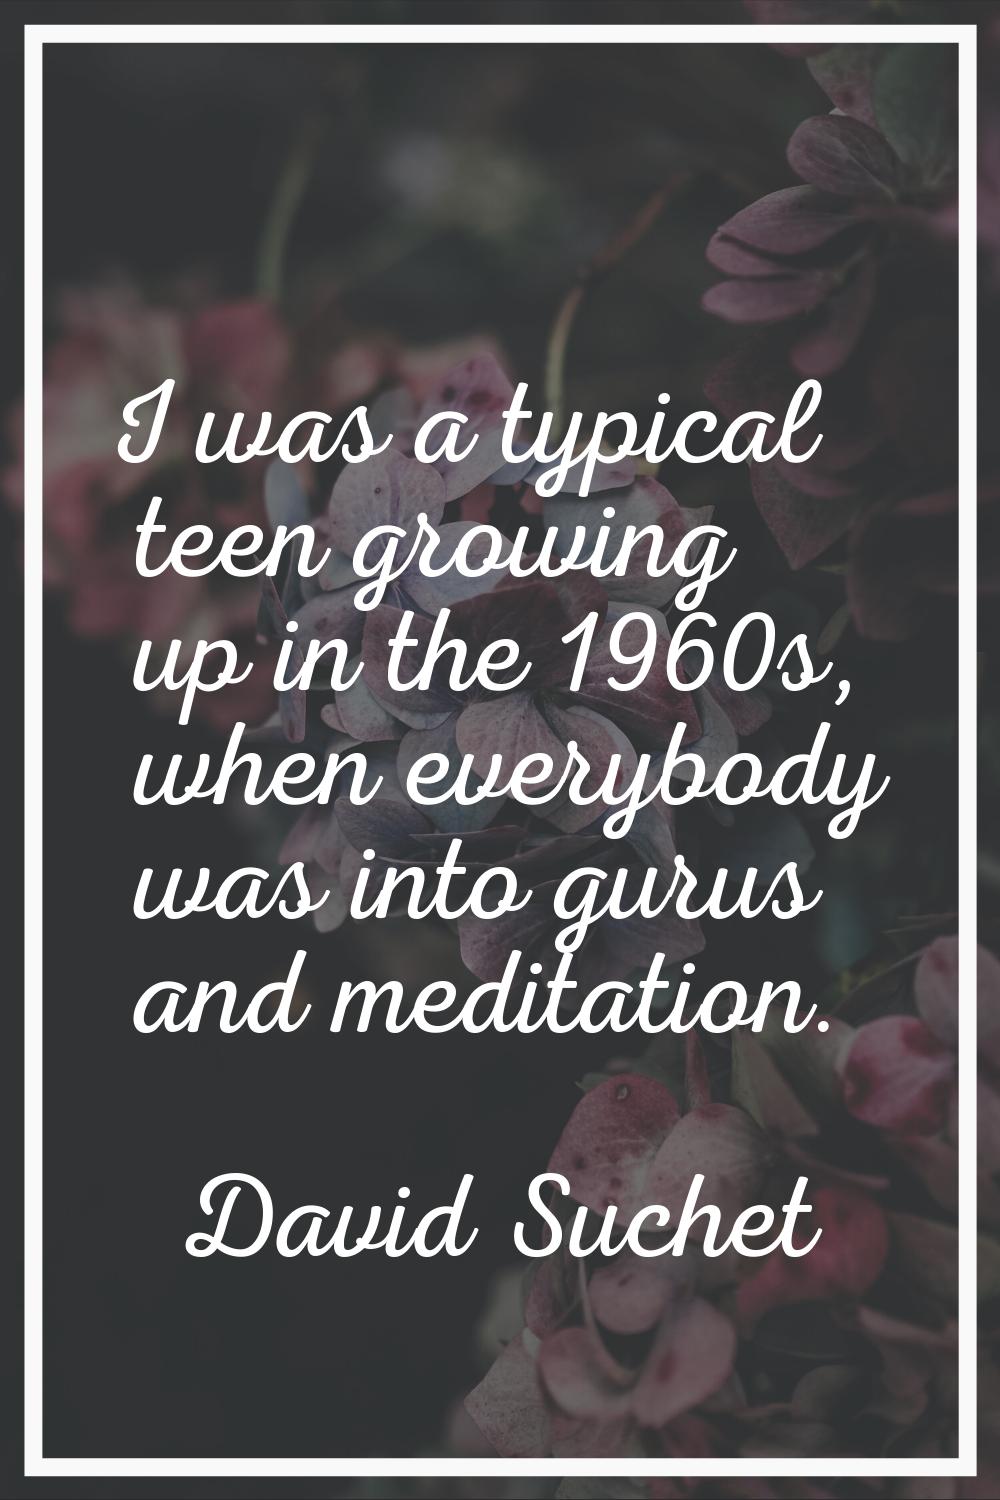 I was a typical teen growing up in the 1960s, when everybody was into gurus and meditation.